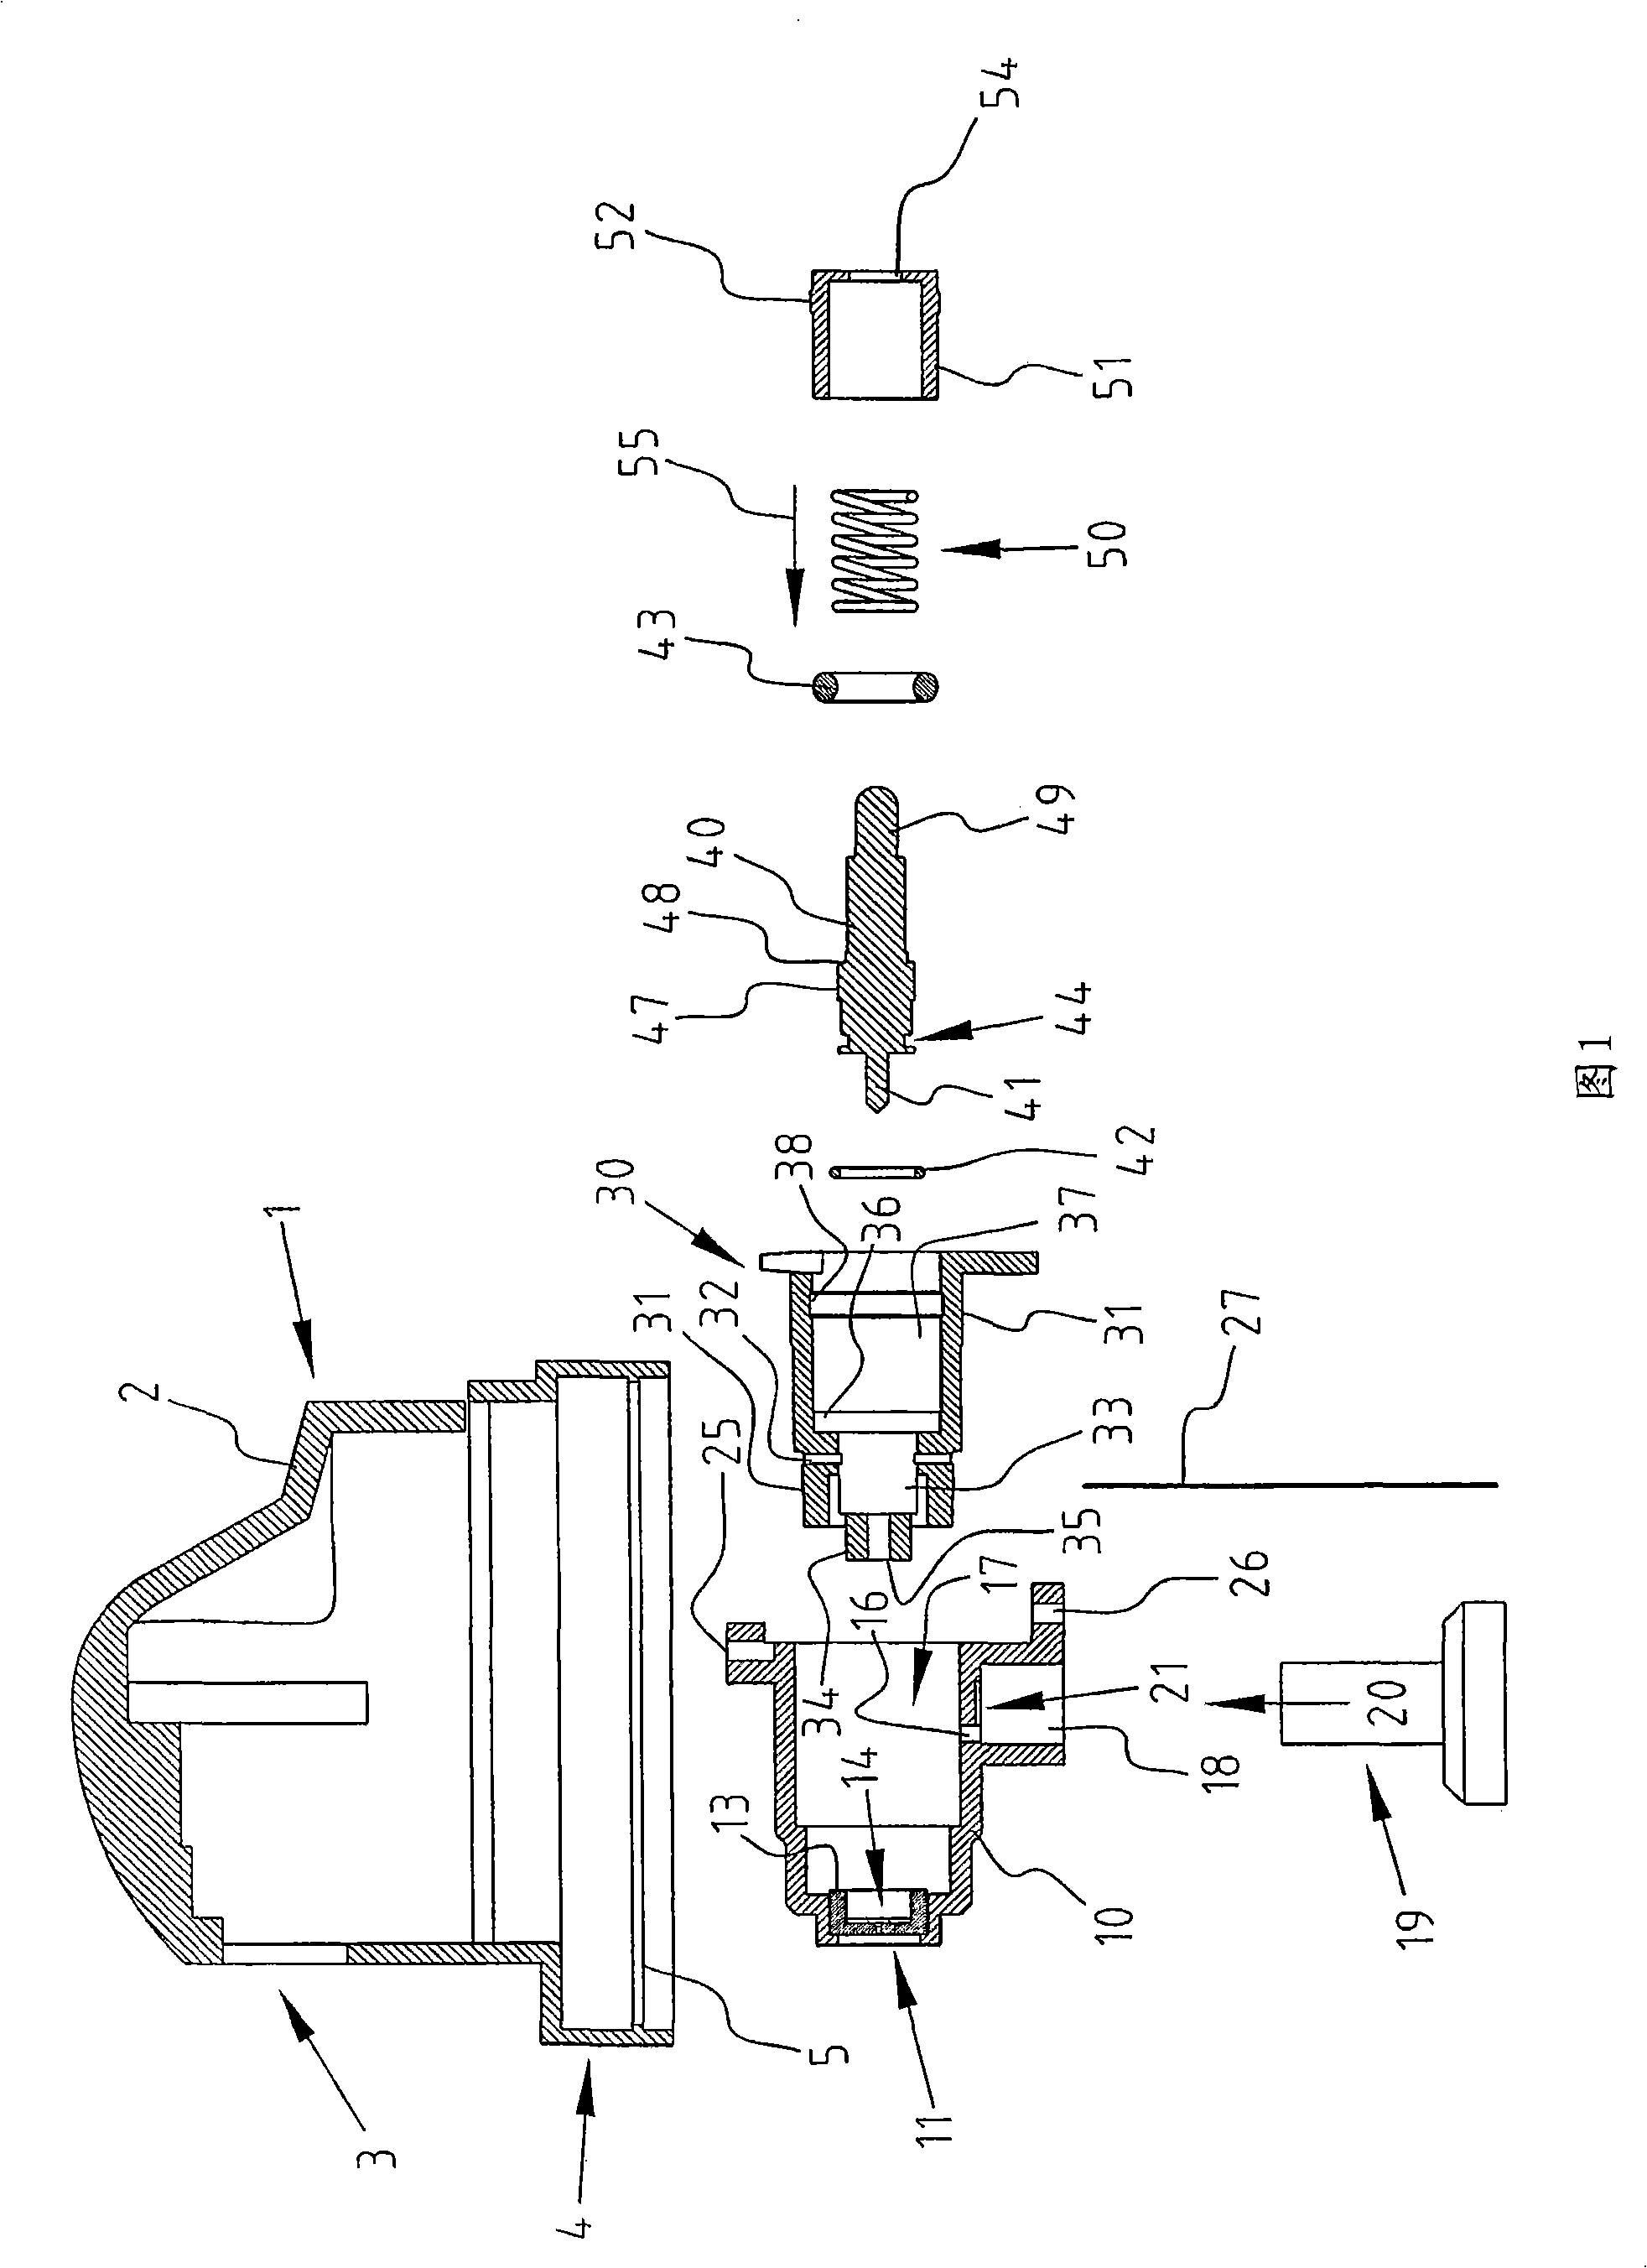 Actuator for a receptacle having a pressurized content and method for spraying a pressurized content